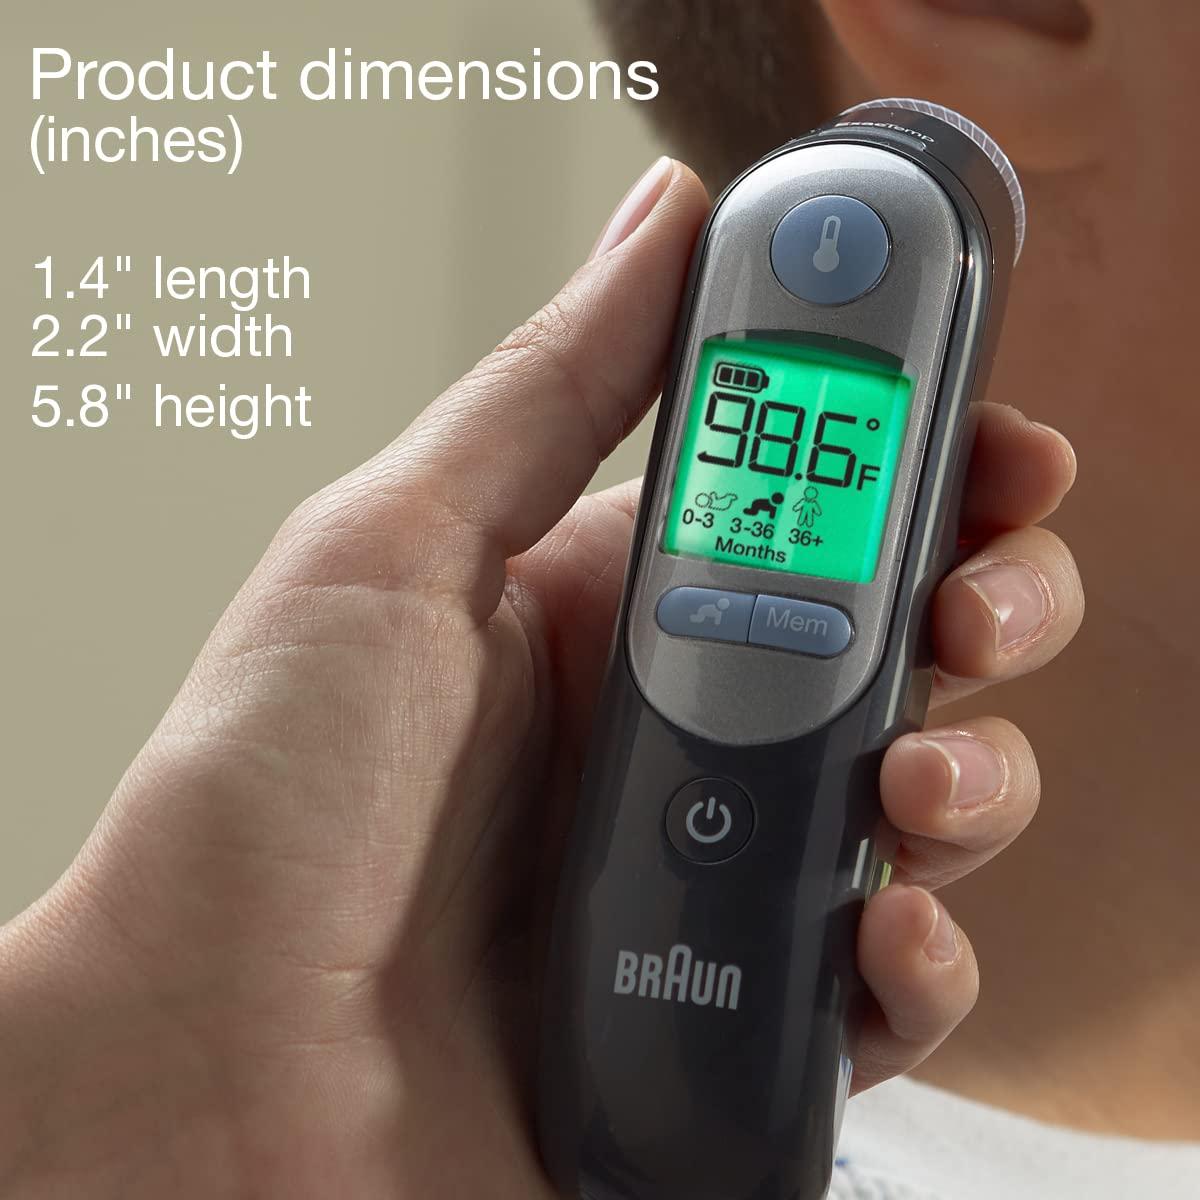 Braun ThermoScan 7: What to Know As A User by Kimflyangel2 - Issuu